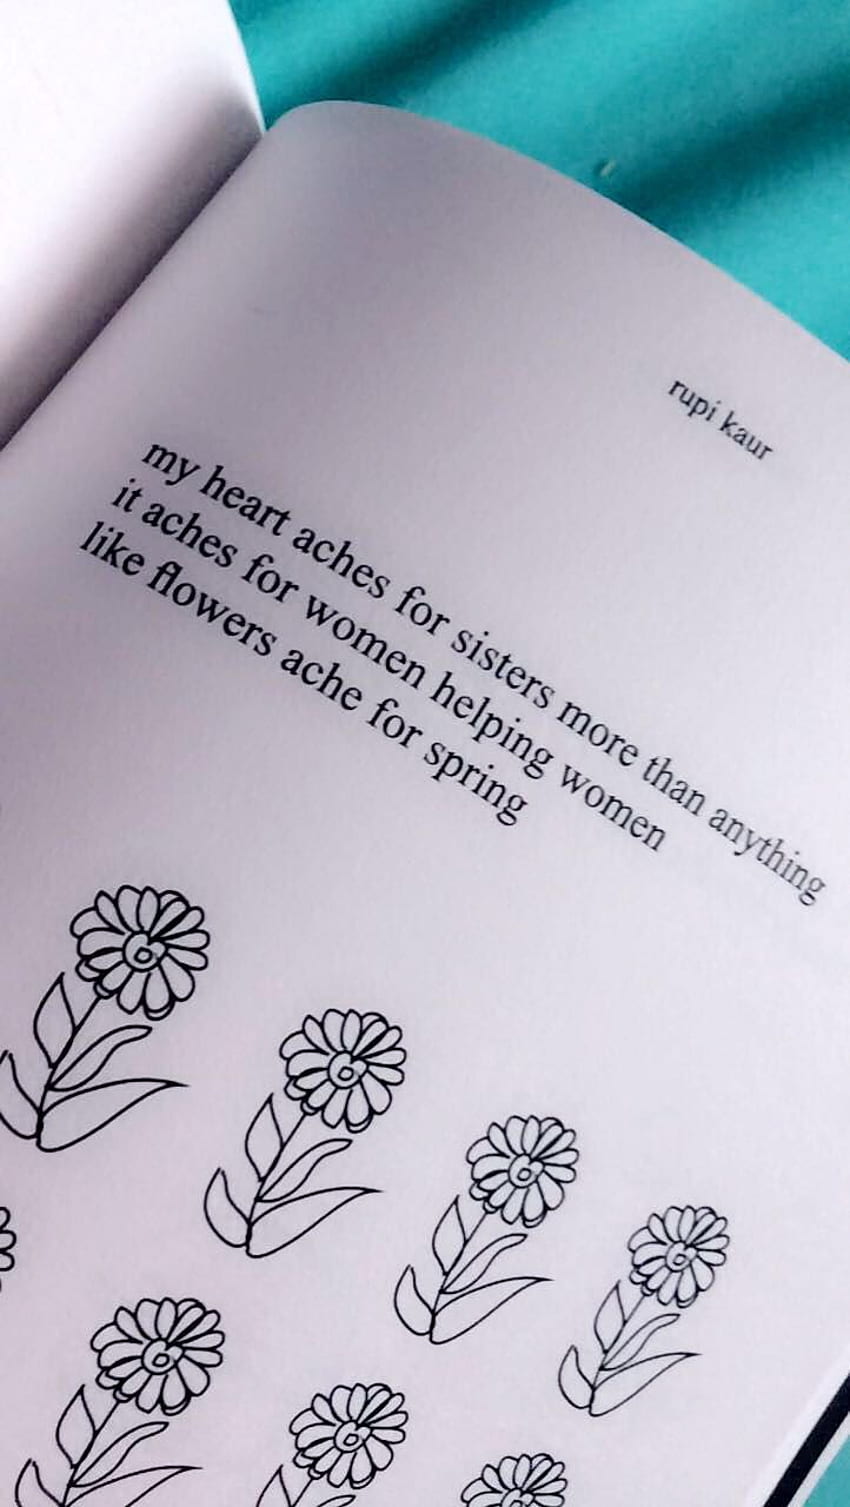 Rupi Kaur. Milk and Honey. Milk and honey quotes, Drawing quotes, Book quotes HD phone wallpaper